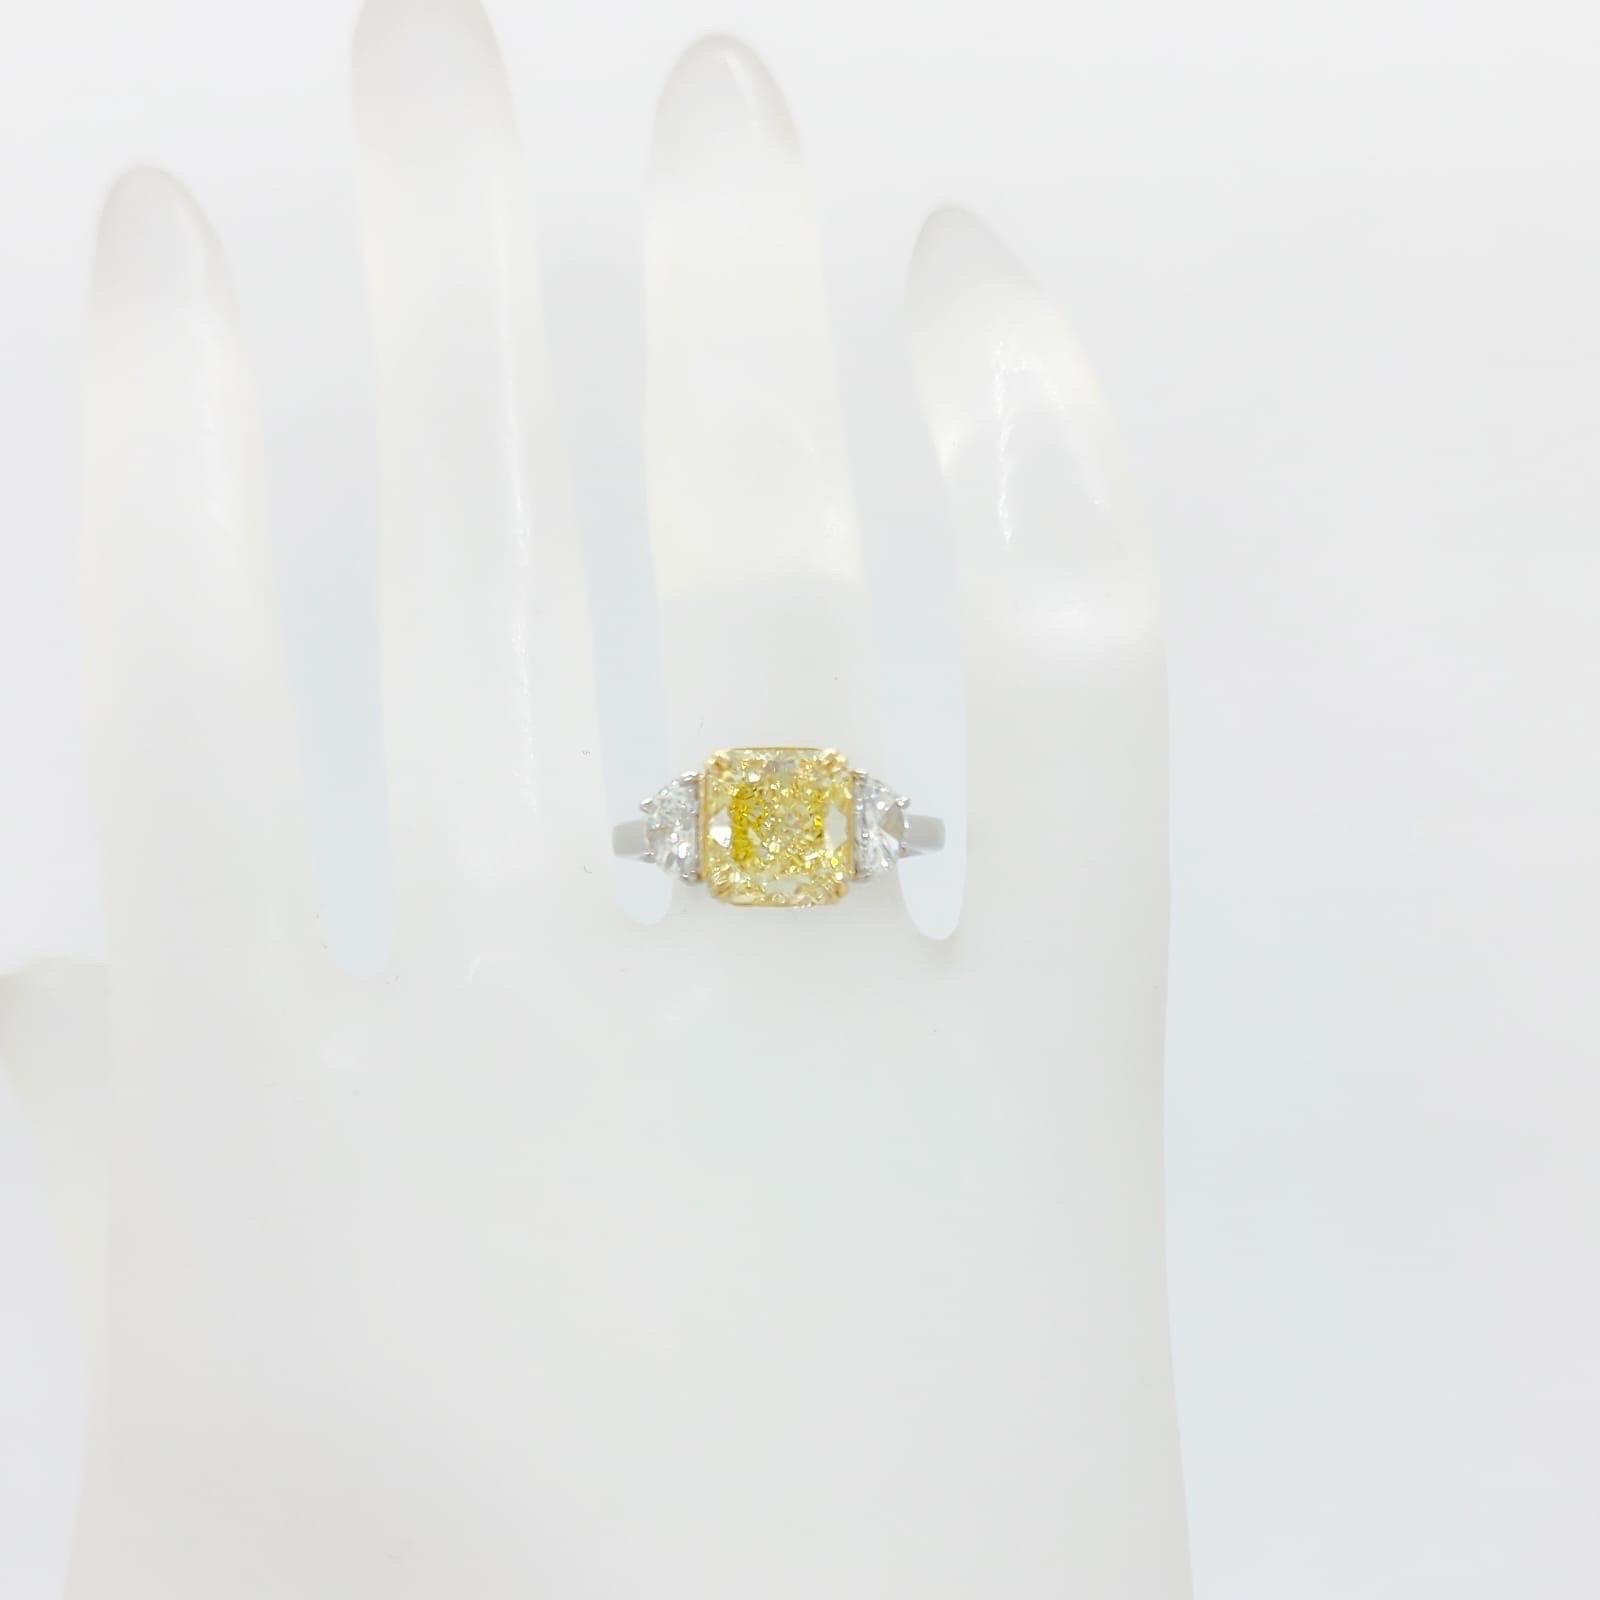 GIA Fancy Intense Yellow Diamond Radiant Three Stone Ring in Platinum and 18k For Sale 2